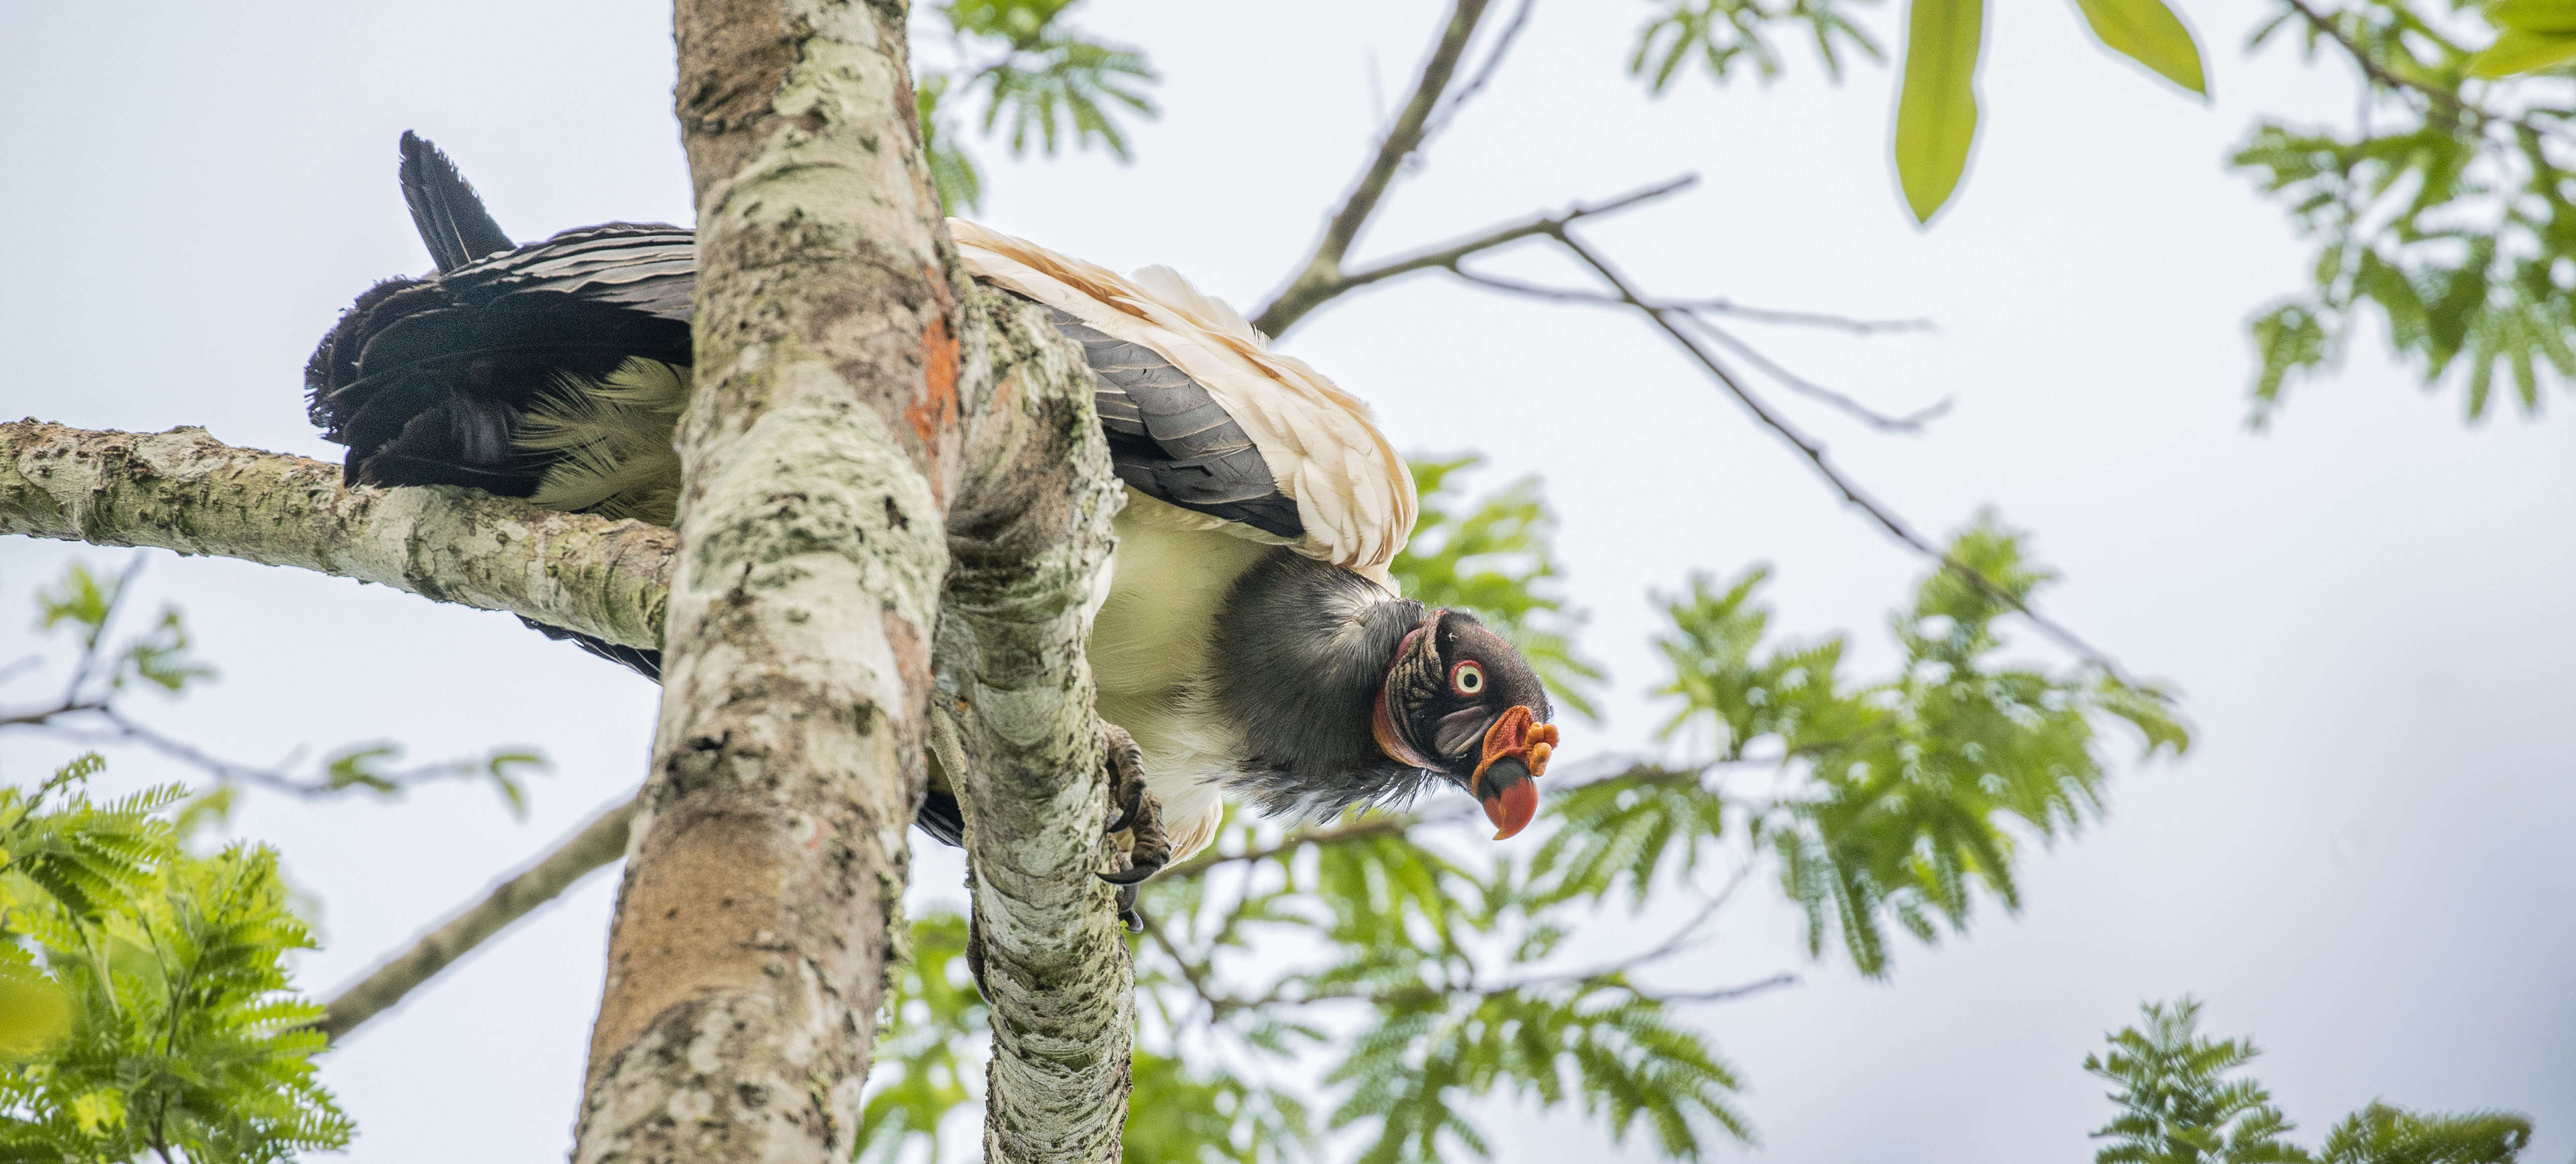 large king vulture leaning down from perch on tree branch